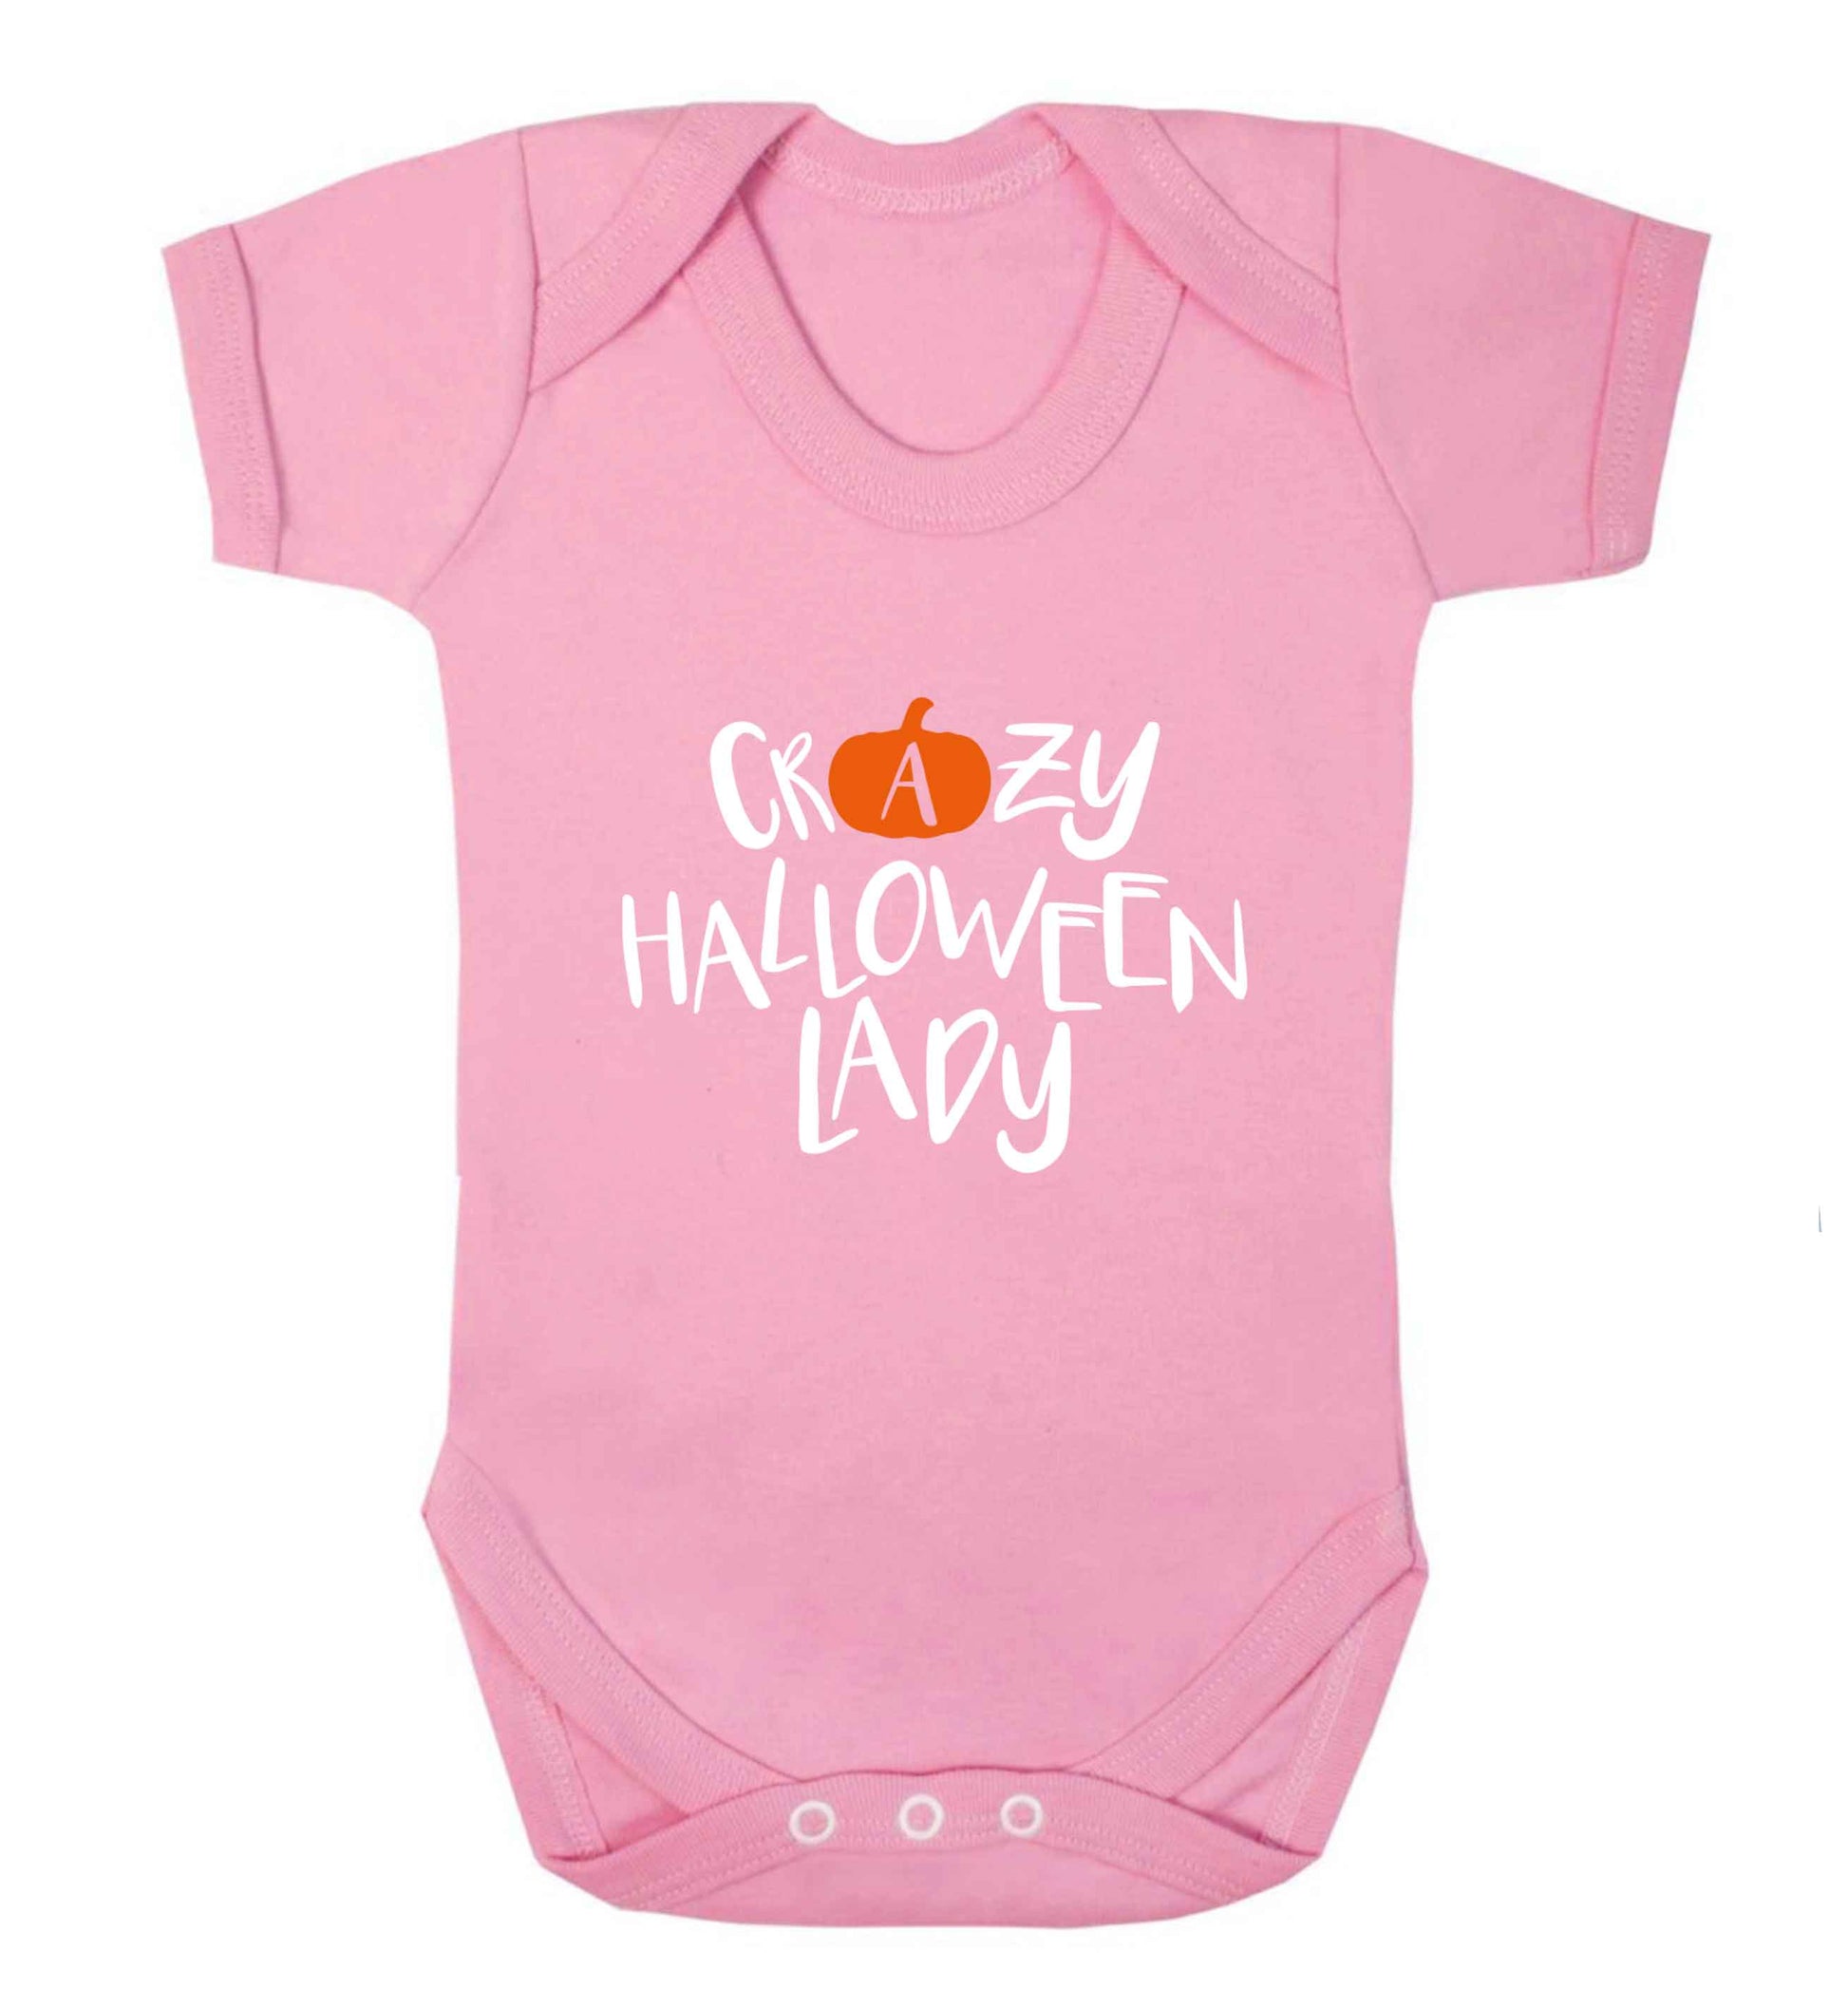 Crazy halloween lady baby vest pale pink 18-24 months